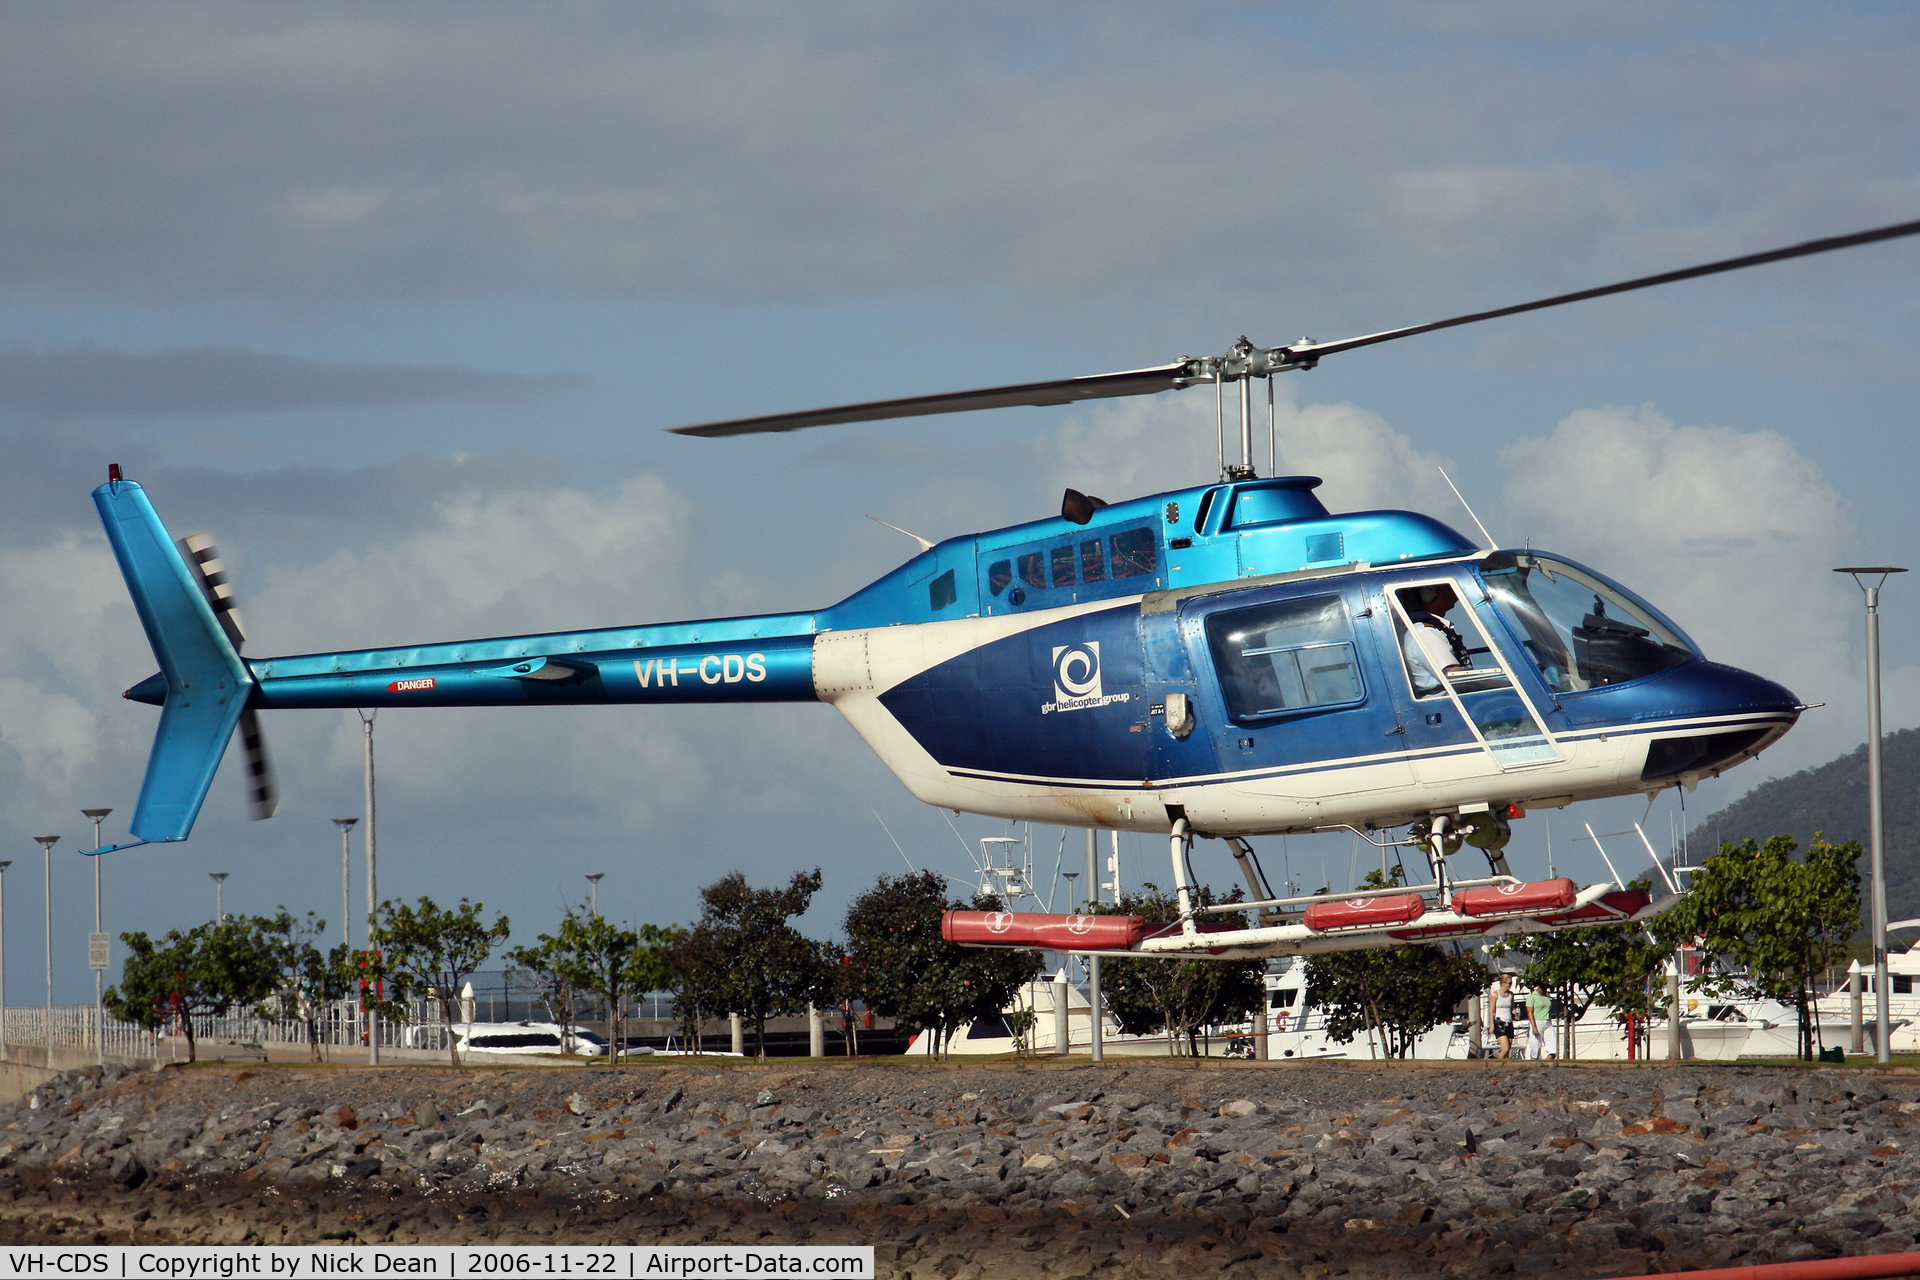 VH-CDS, 1978 Bell 206B (III) C/N 2446, Cairns Harbour heliport at the Shang-ri-la hotel